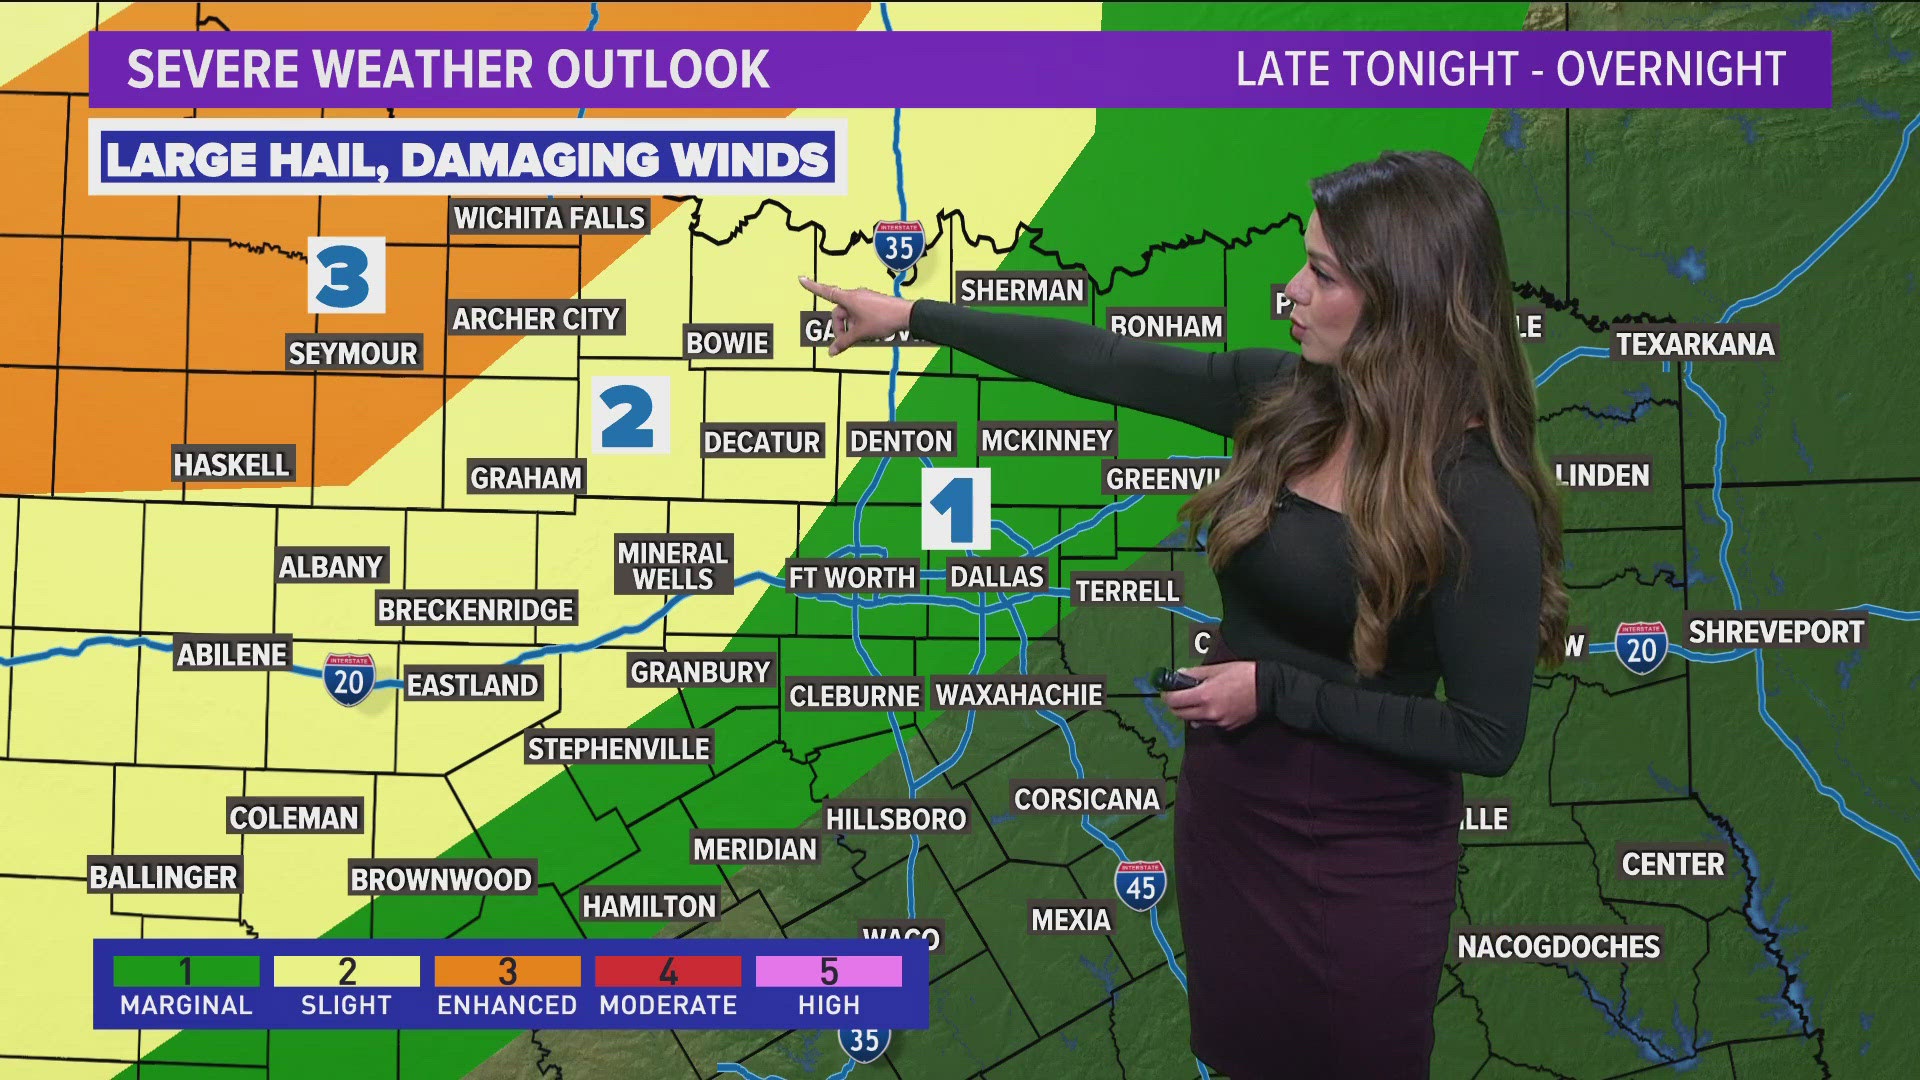 DFW Weather: Storms arrive in North Texas tonight and Friday morning. Severe weather threat through the weekend.